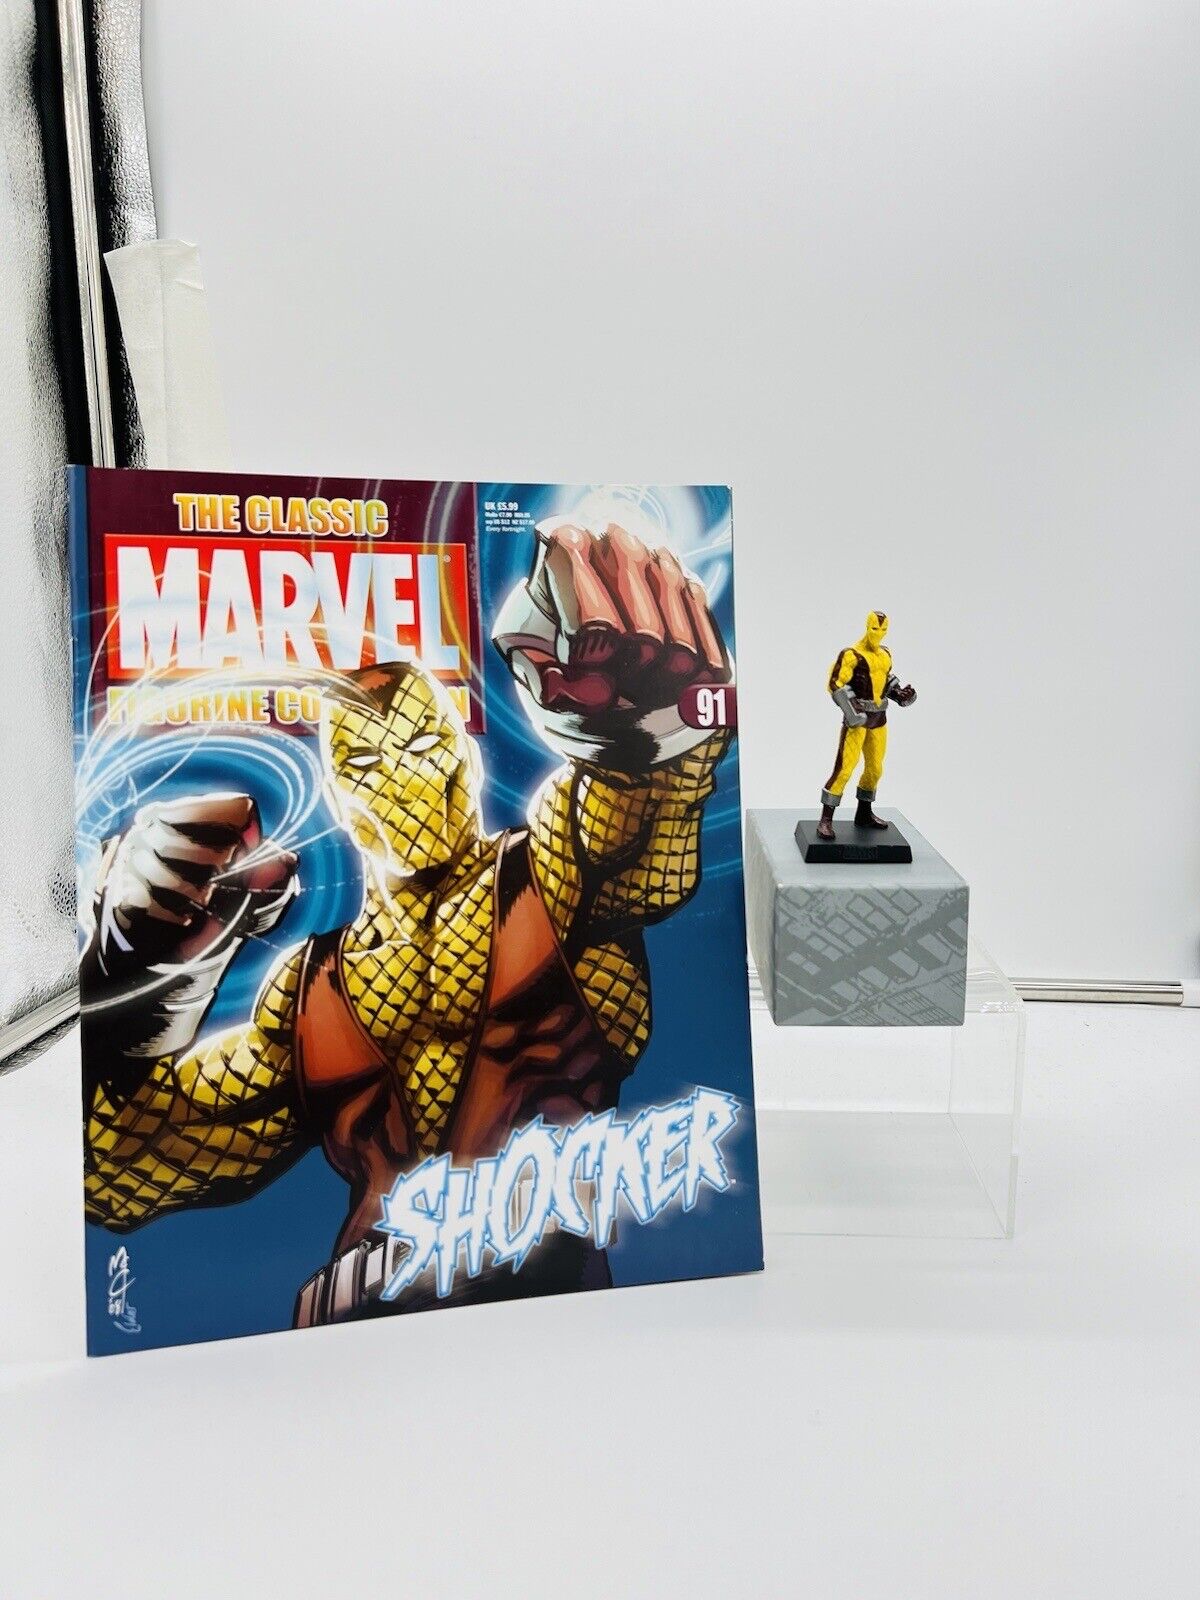 SHOCKER MARVEL CLASSIC ACTION FIGURE HAND PAINTED WITH MAGAZINE BY EAGLEMOSS